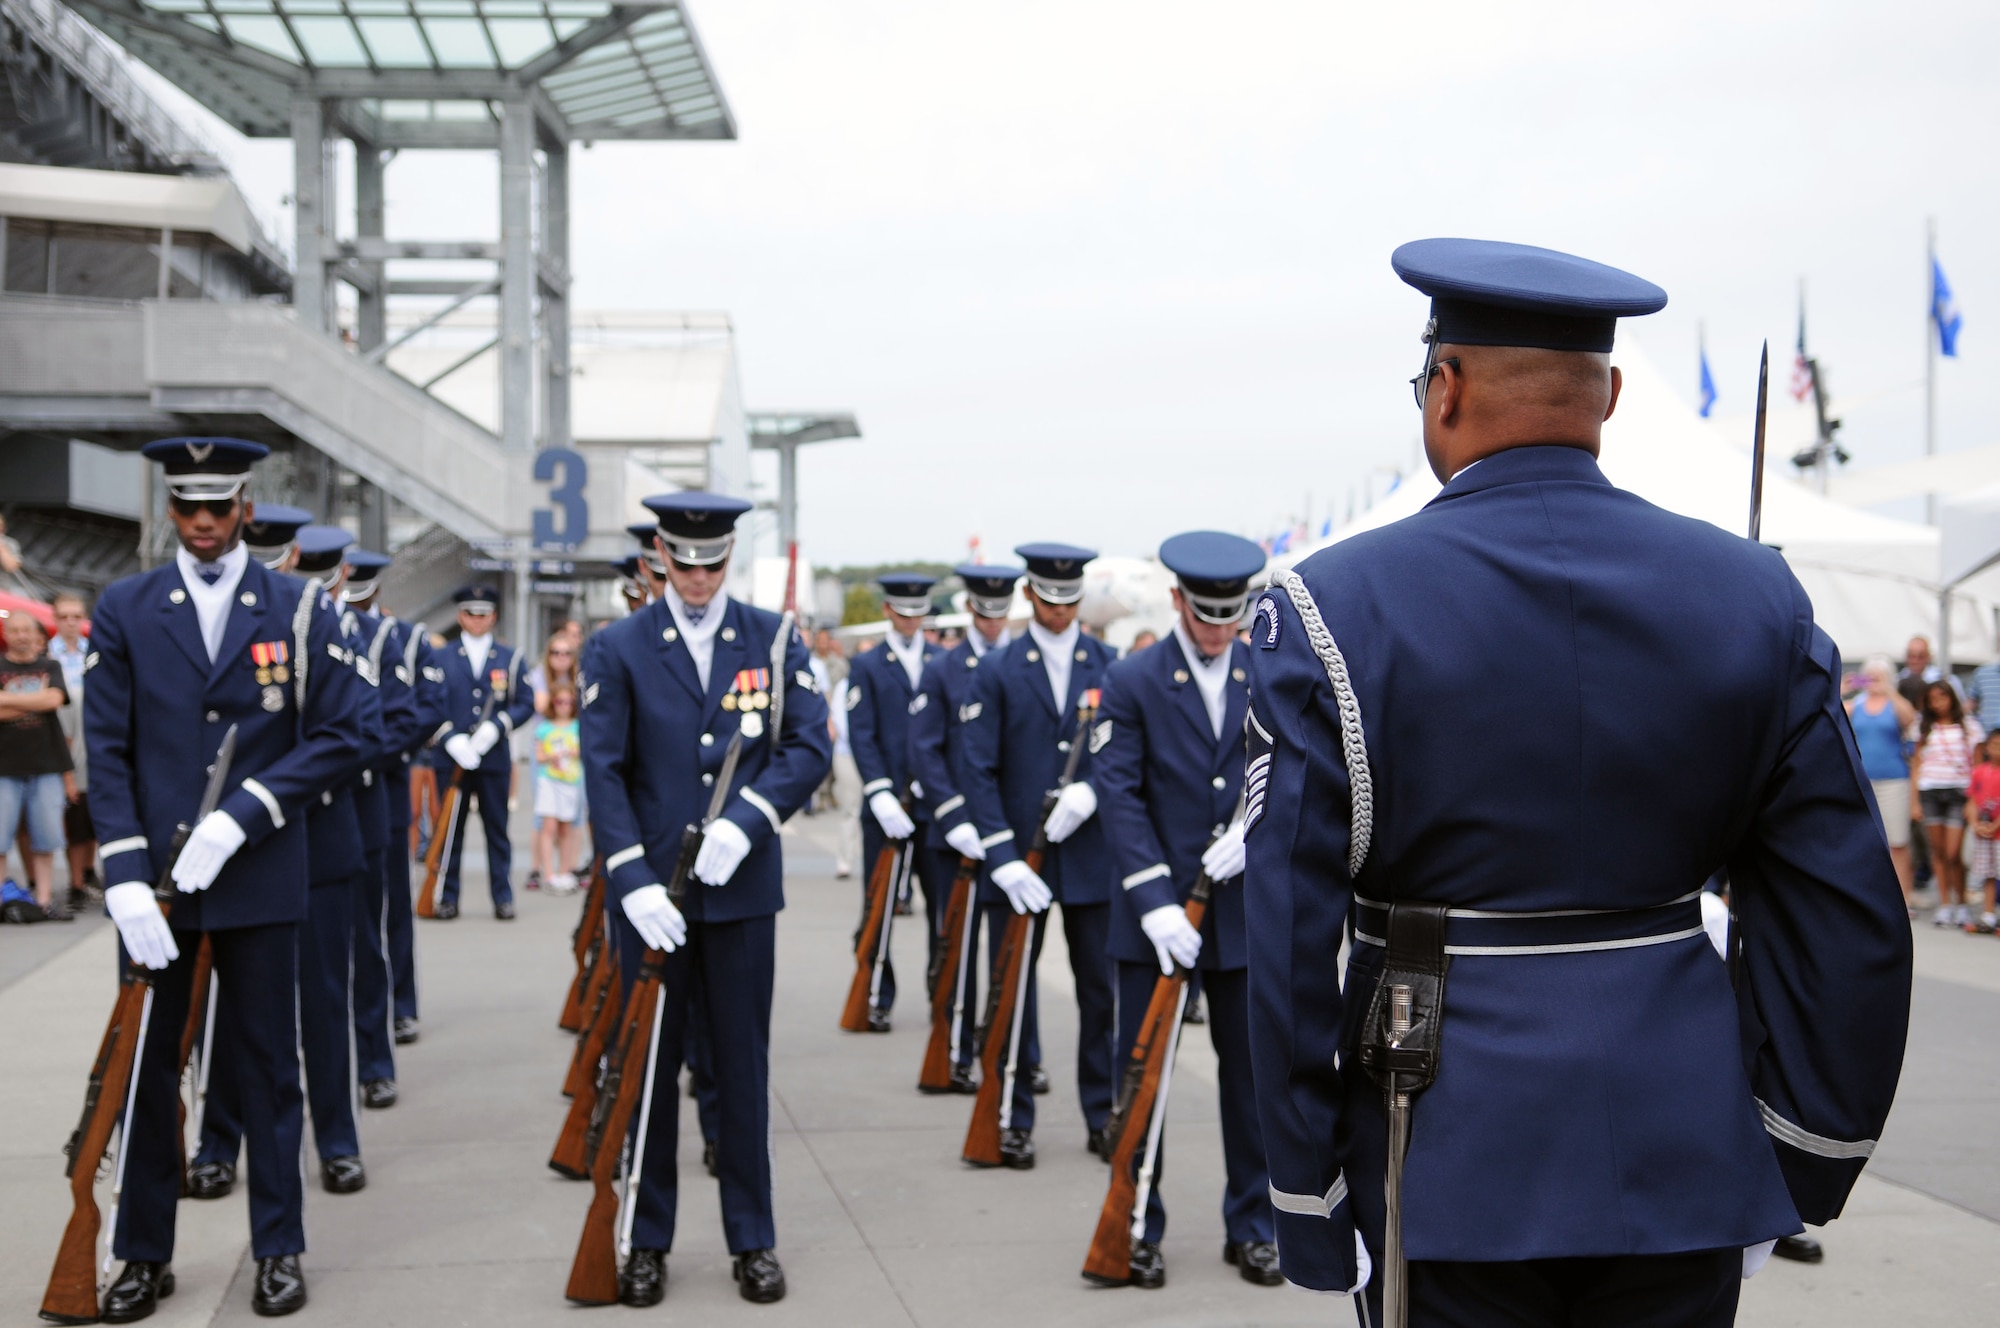 The U.S. Air Force Honor Guard Drill Team stand at ceremonial at-ease Aug. 19 in New York, N.Y., waiting for the order of attention from Master Sgt. Whitfield Jack, superintendent of the Drill Team, and native of Brooklyn, N.Y. The Drill Team is performing during Air Force Week 2012. (U.S. Air Force photo by Senior Airman Tabitha N. Haynes)